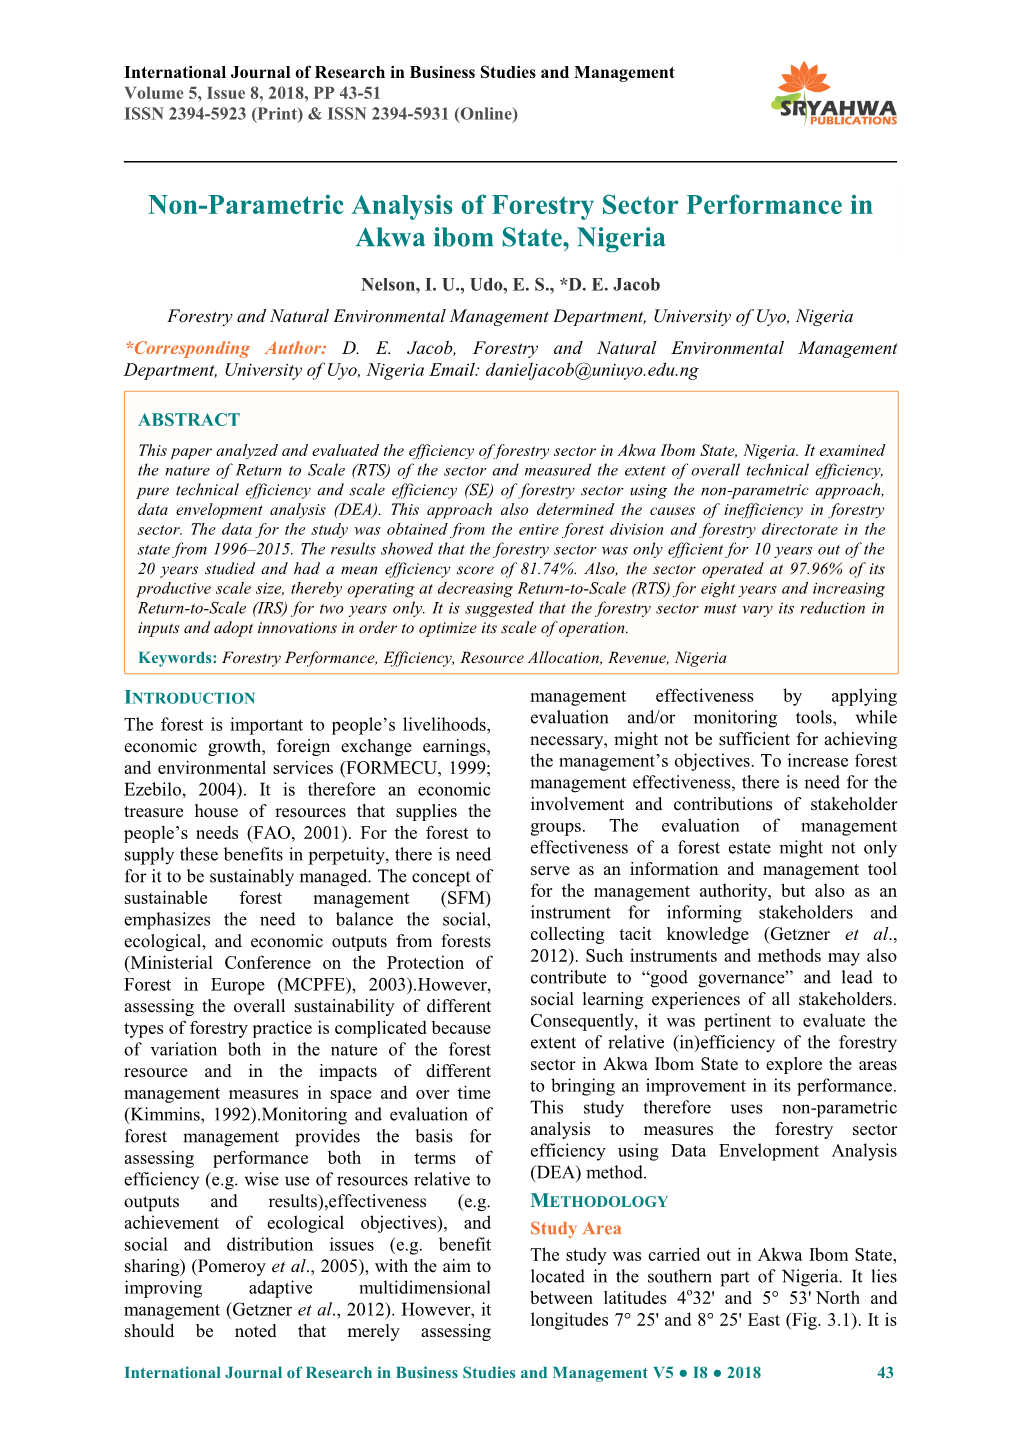 Non-Parametric Analysis of Forestry Sector Performance in Akwa Ibom State, Nigeria